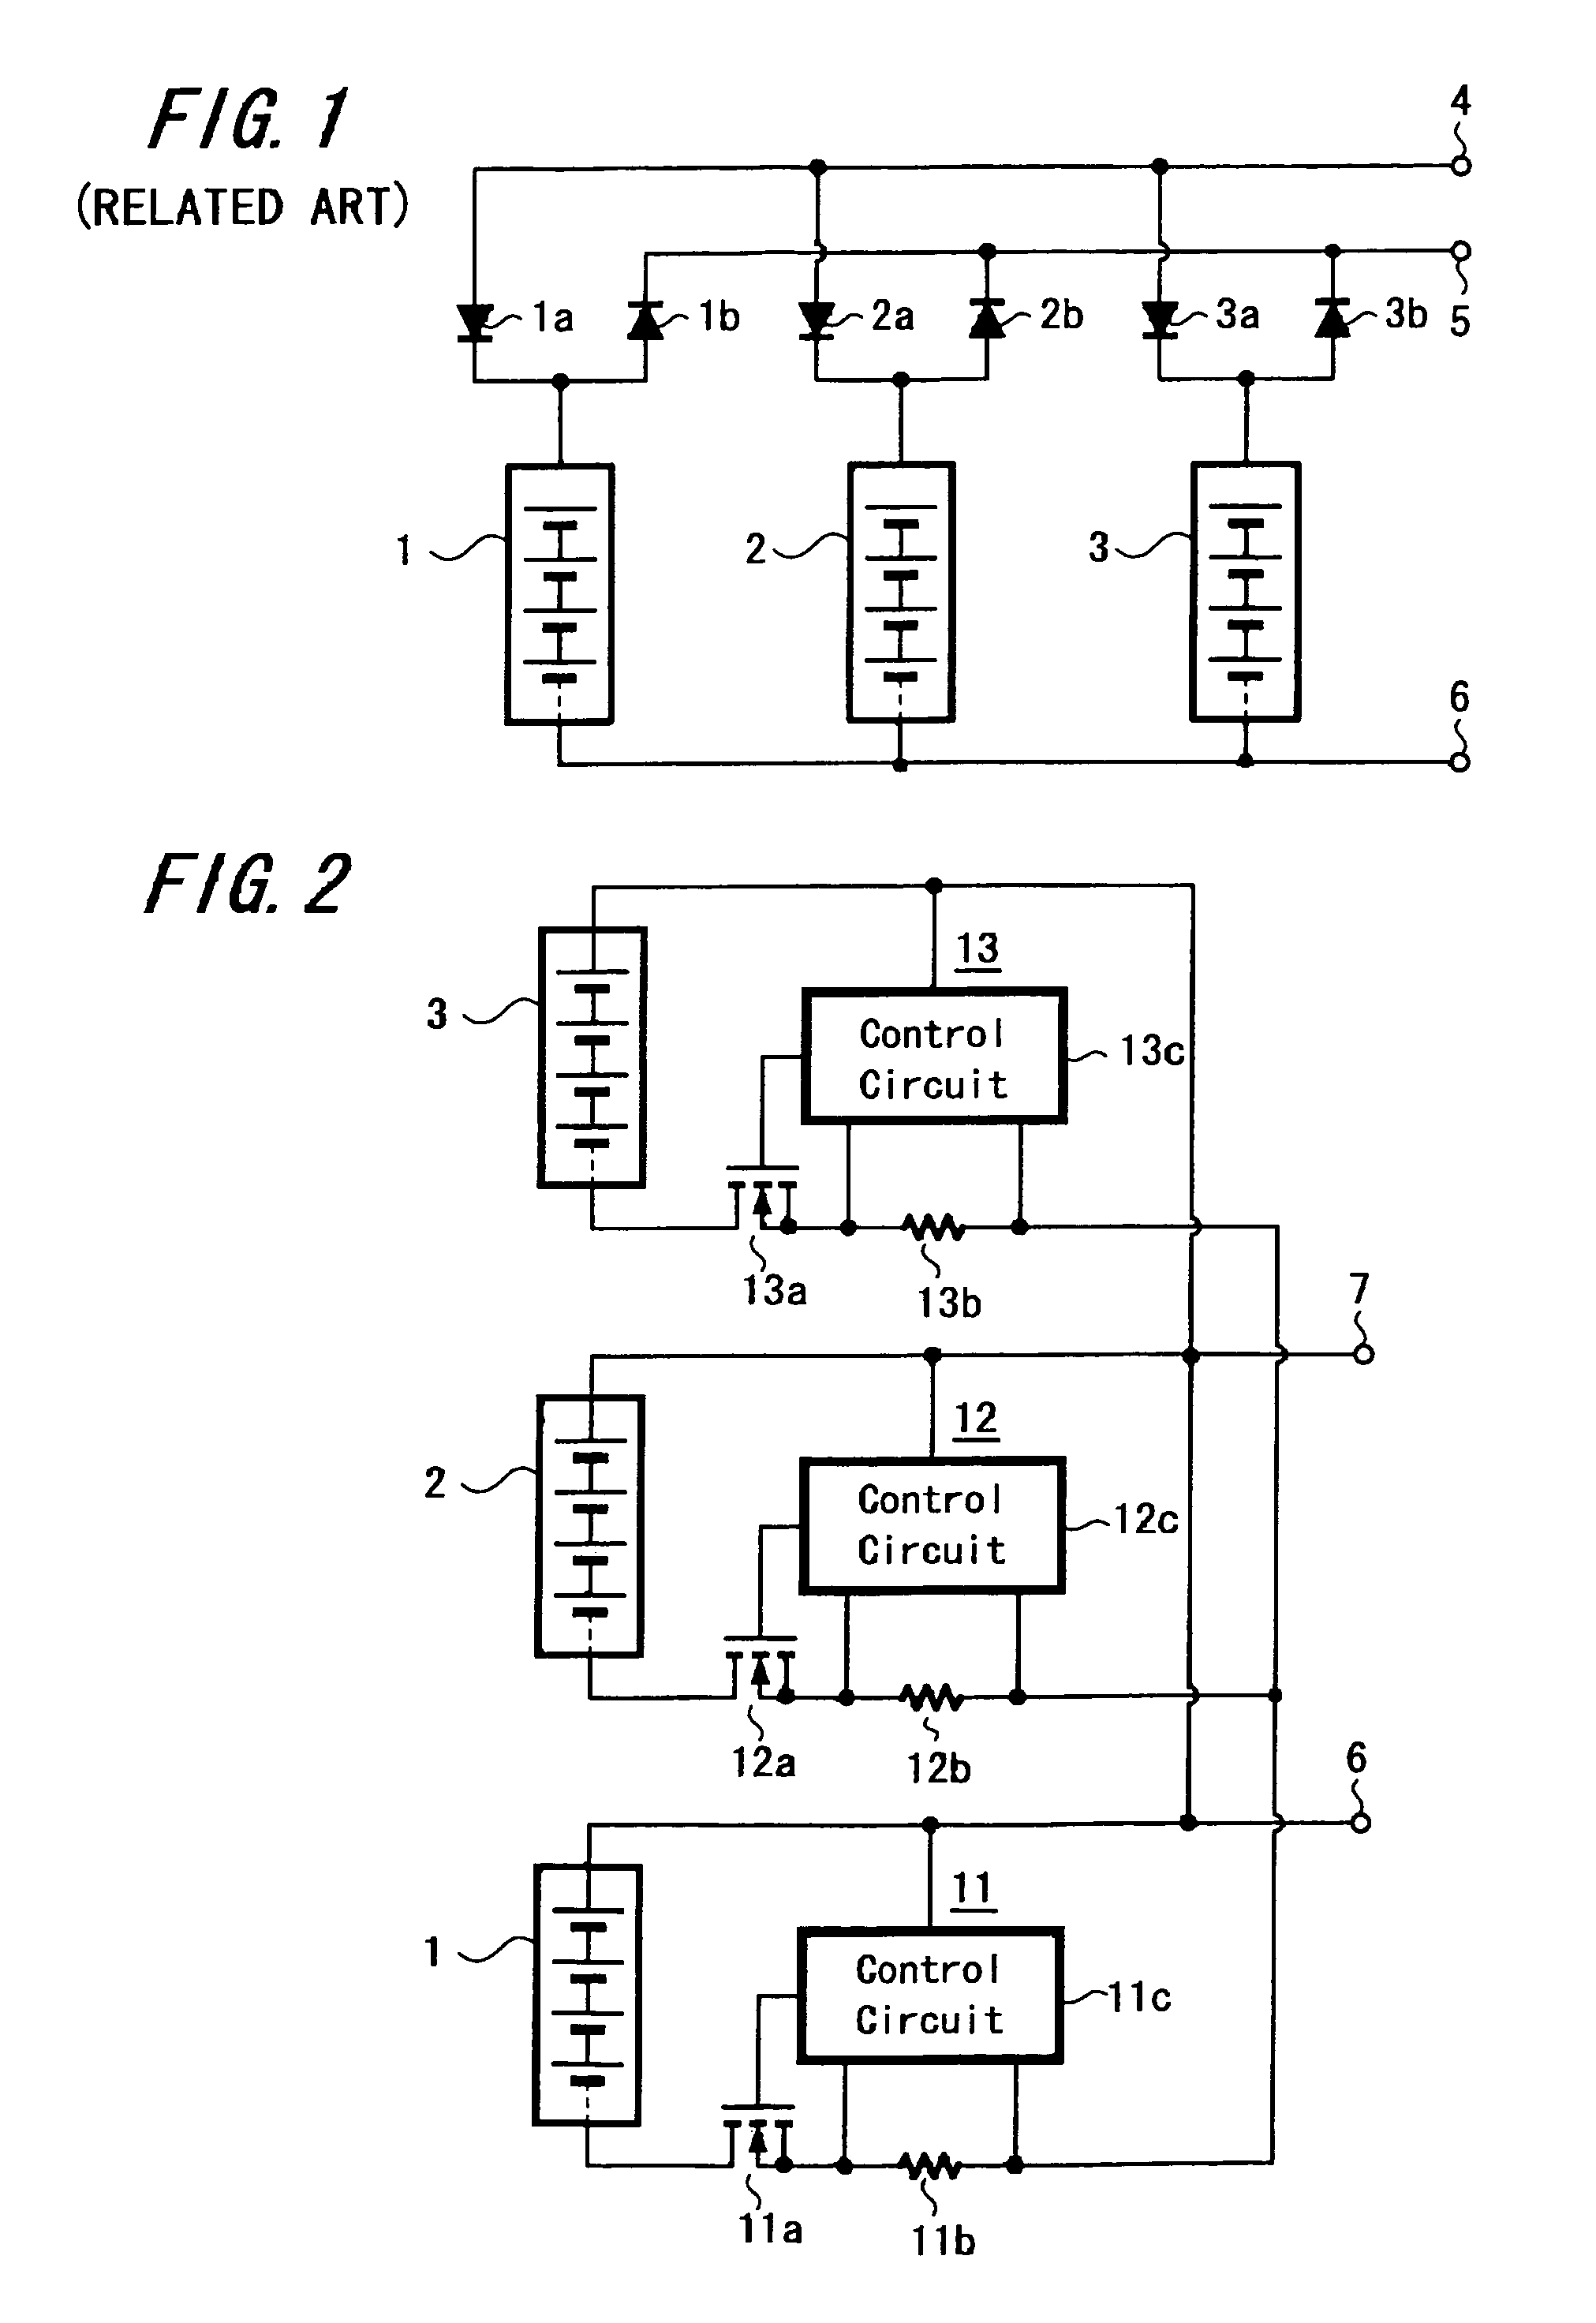 Power supply apparatus with transistor control for constant current between series-connected battery blocks